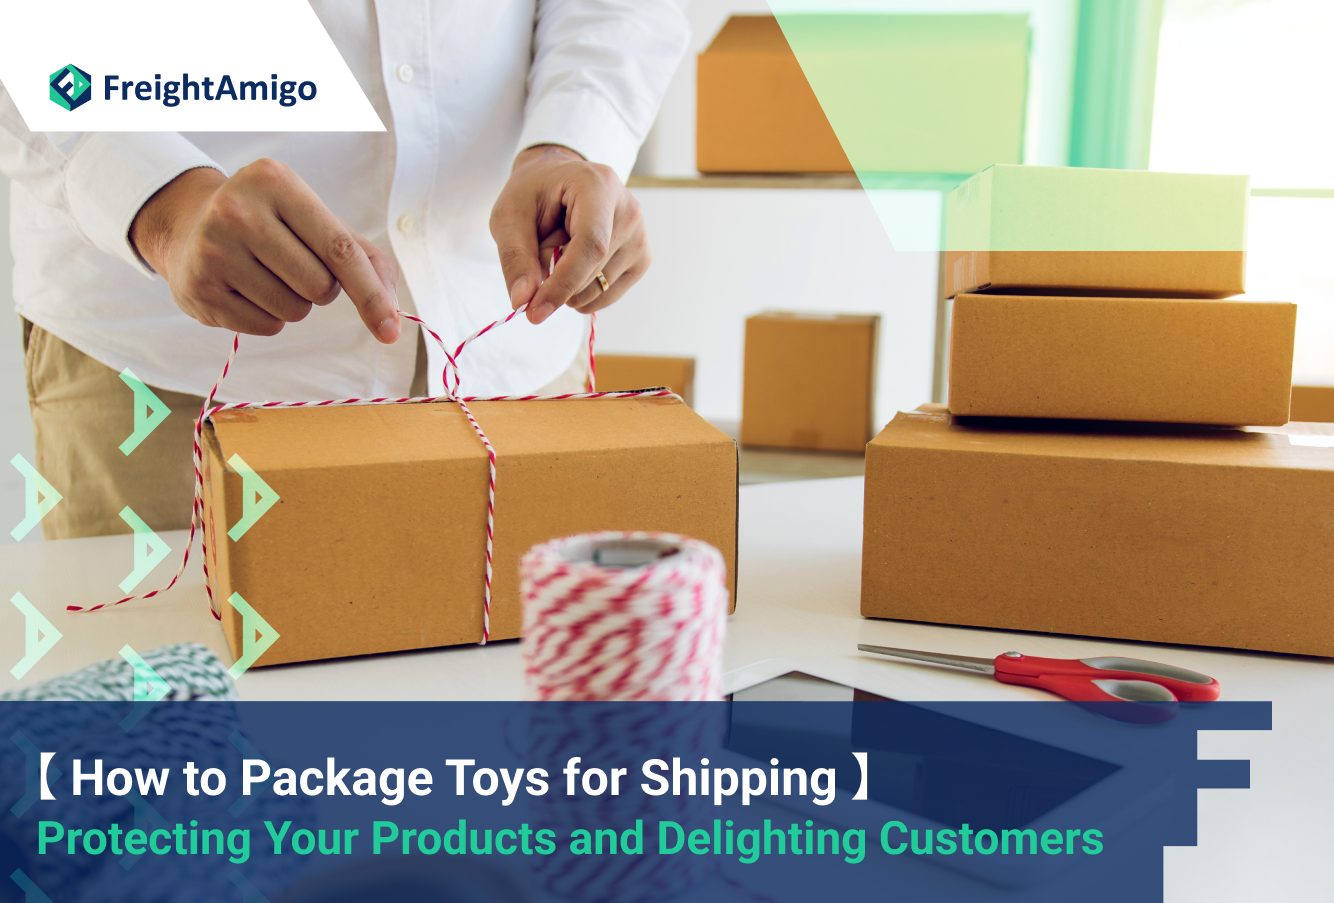 How to Package Toys for Shipping: Protecting Your Products and Delighting Customers